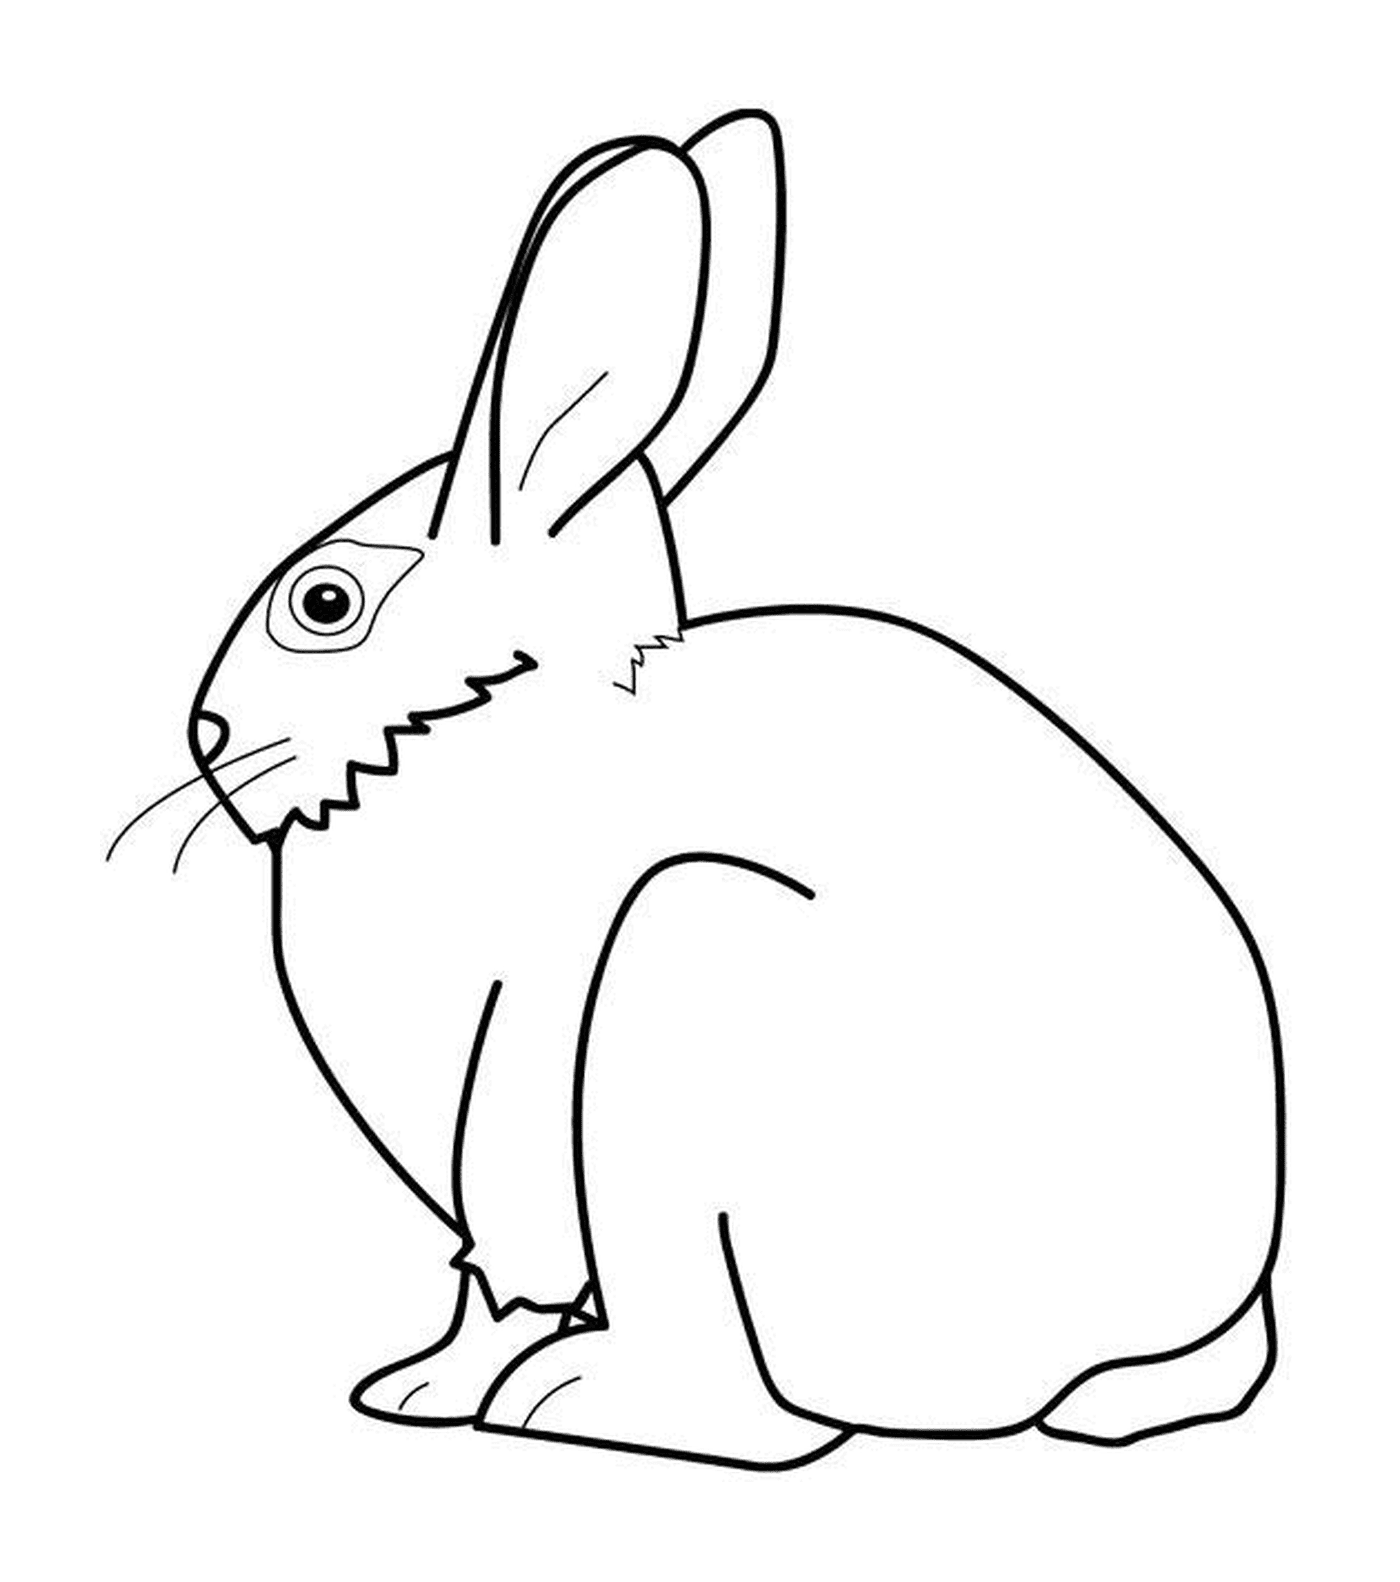  Rabbit seen from the back 